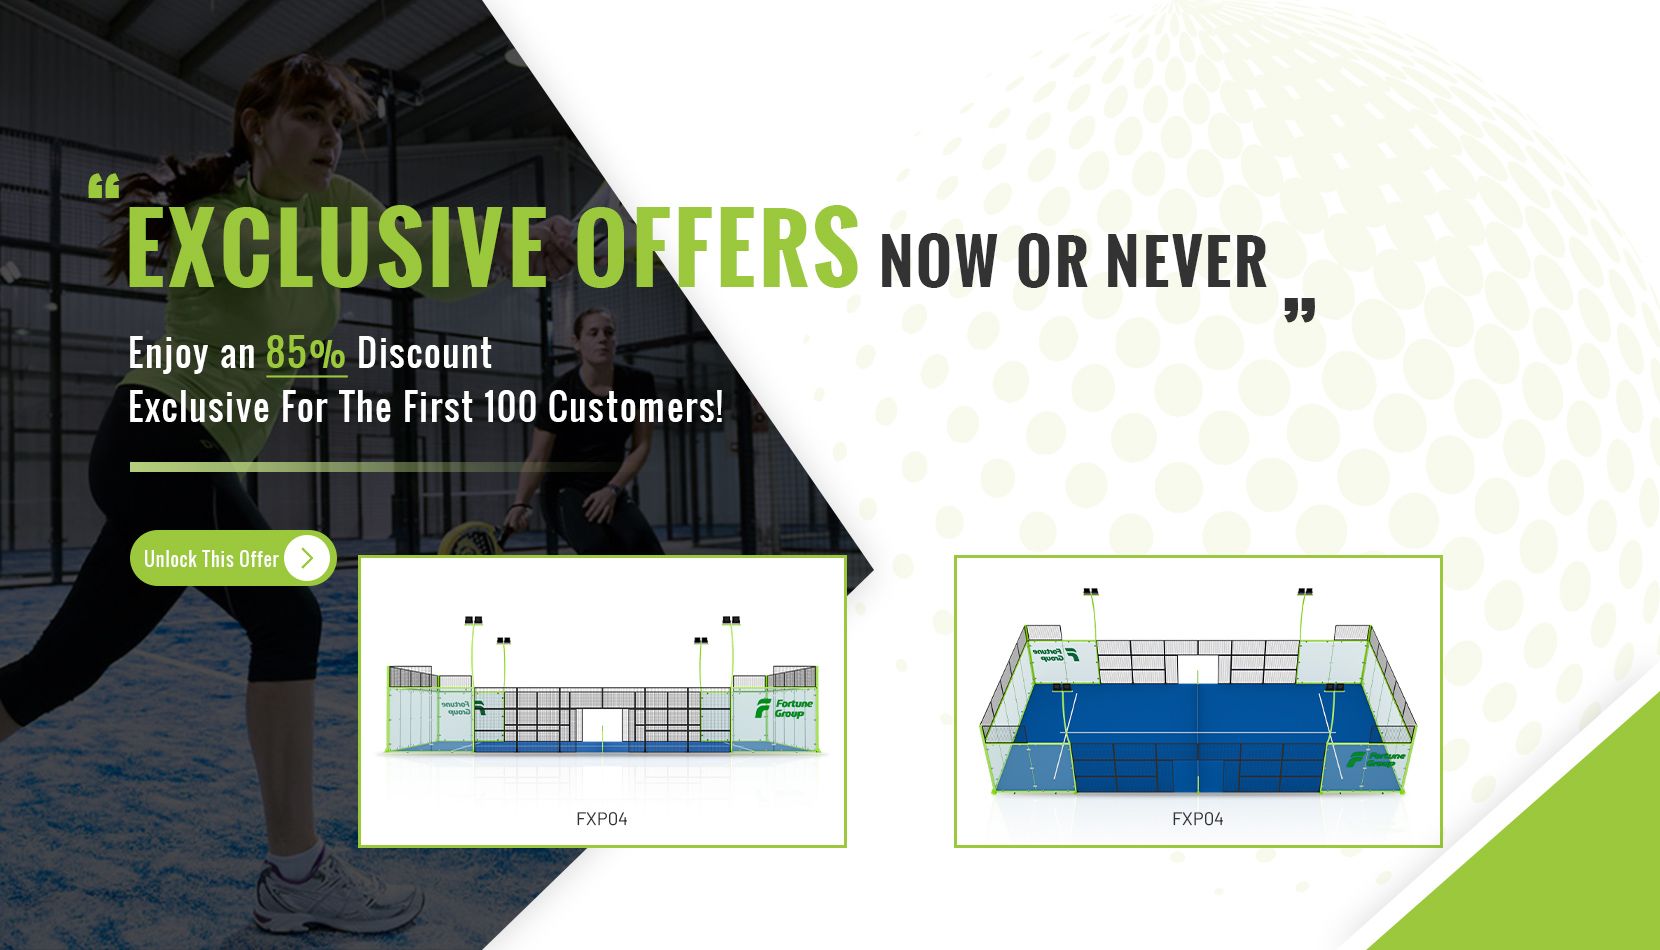 Enjoy an 85% Discount Exclusive For The First 100 Customers!